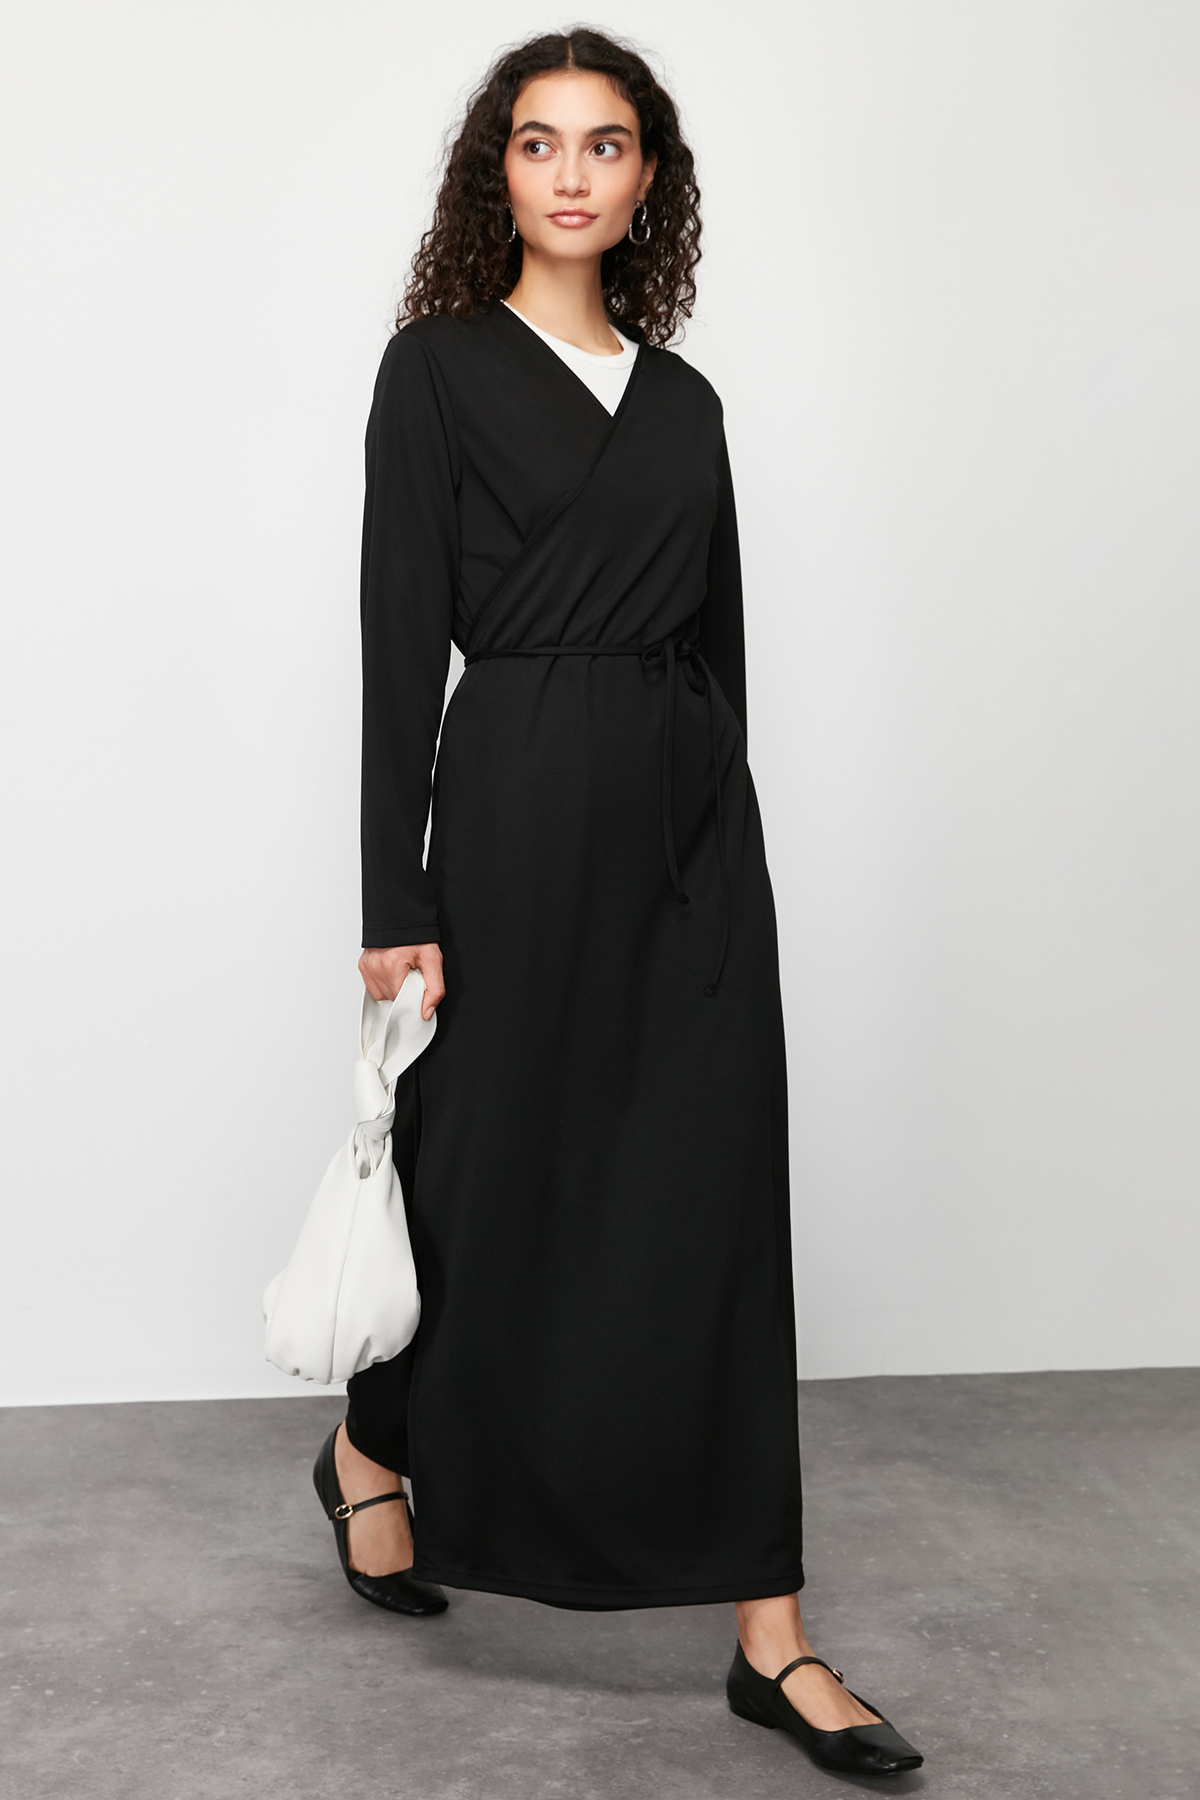 Trendyol Black Double Breasted Neck Belted Plain Knitted Dress